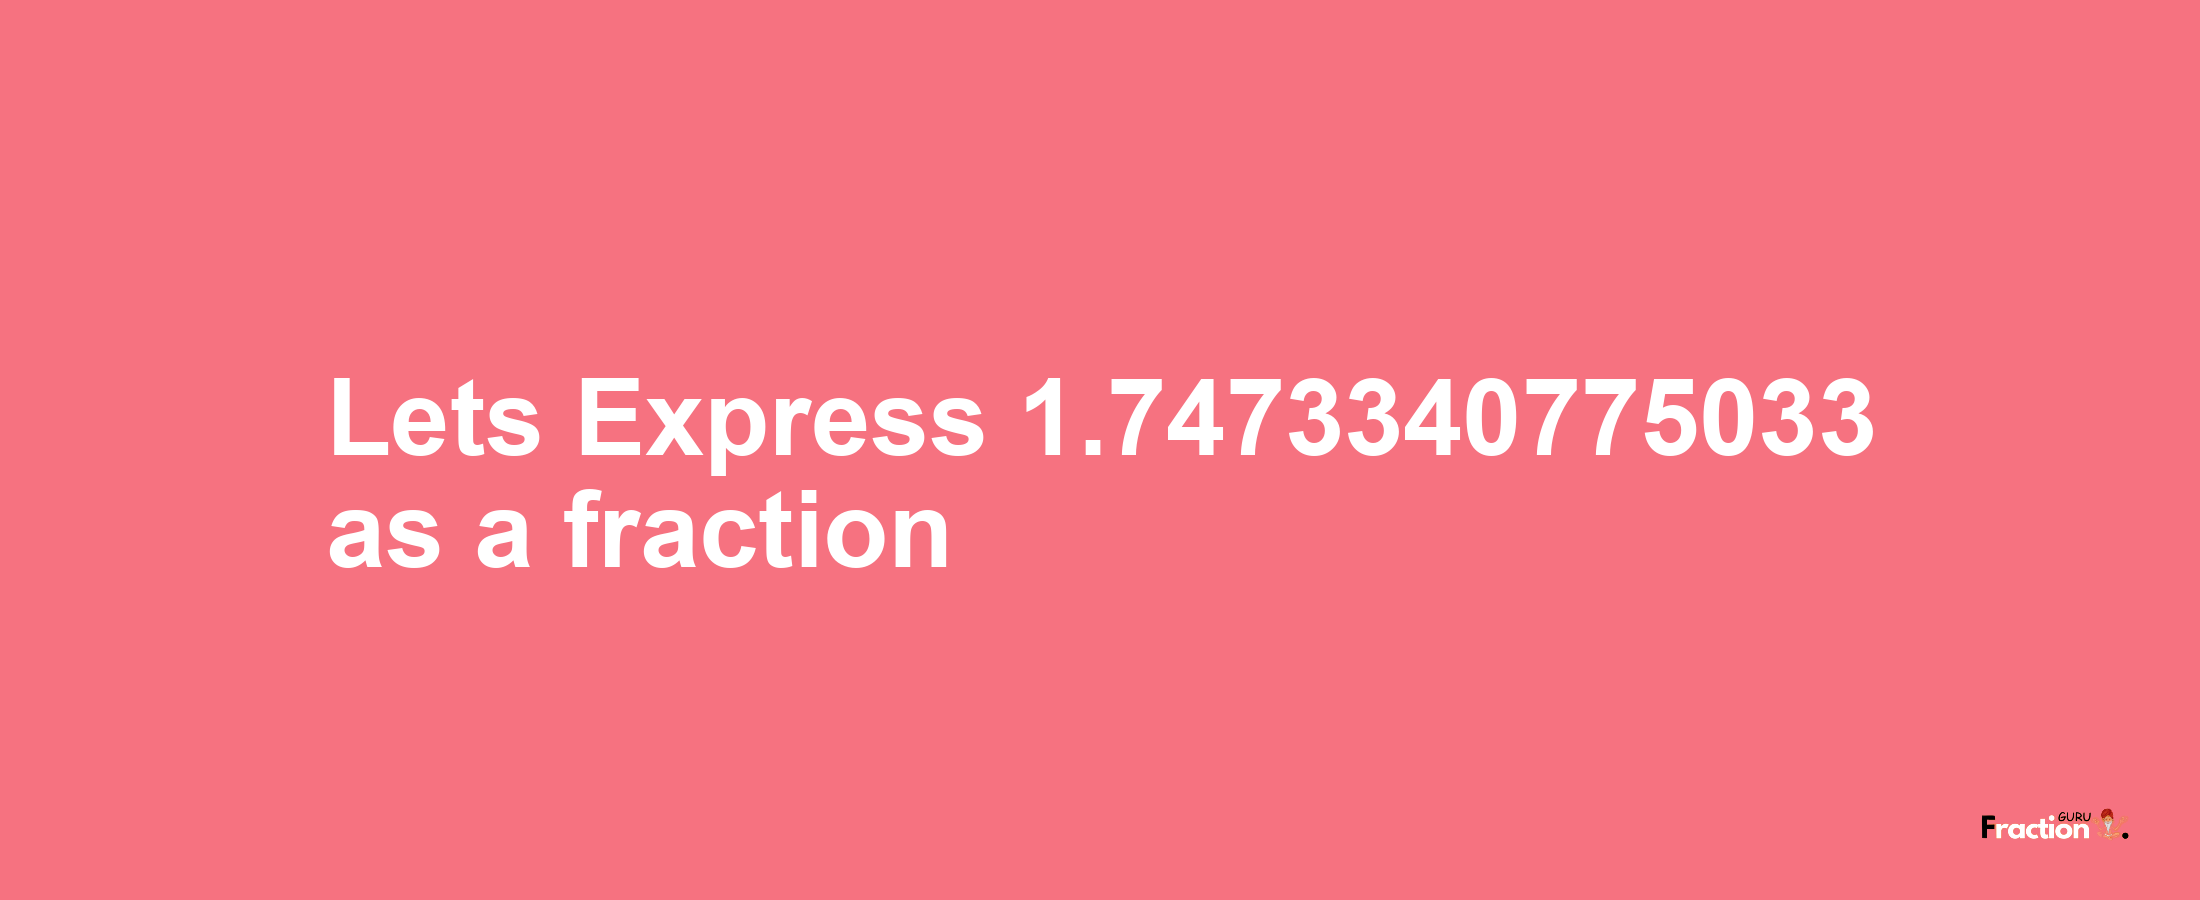 Lets Express 1.7473340775033 as afraction